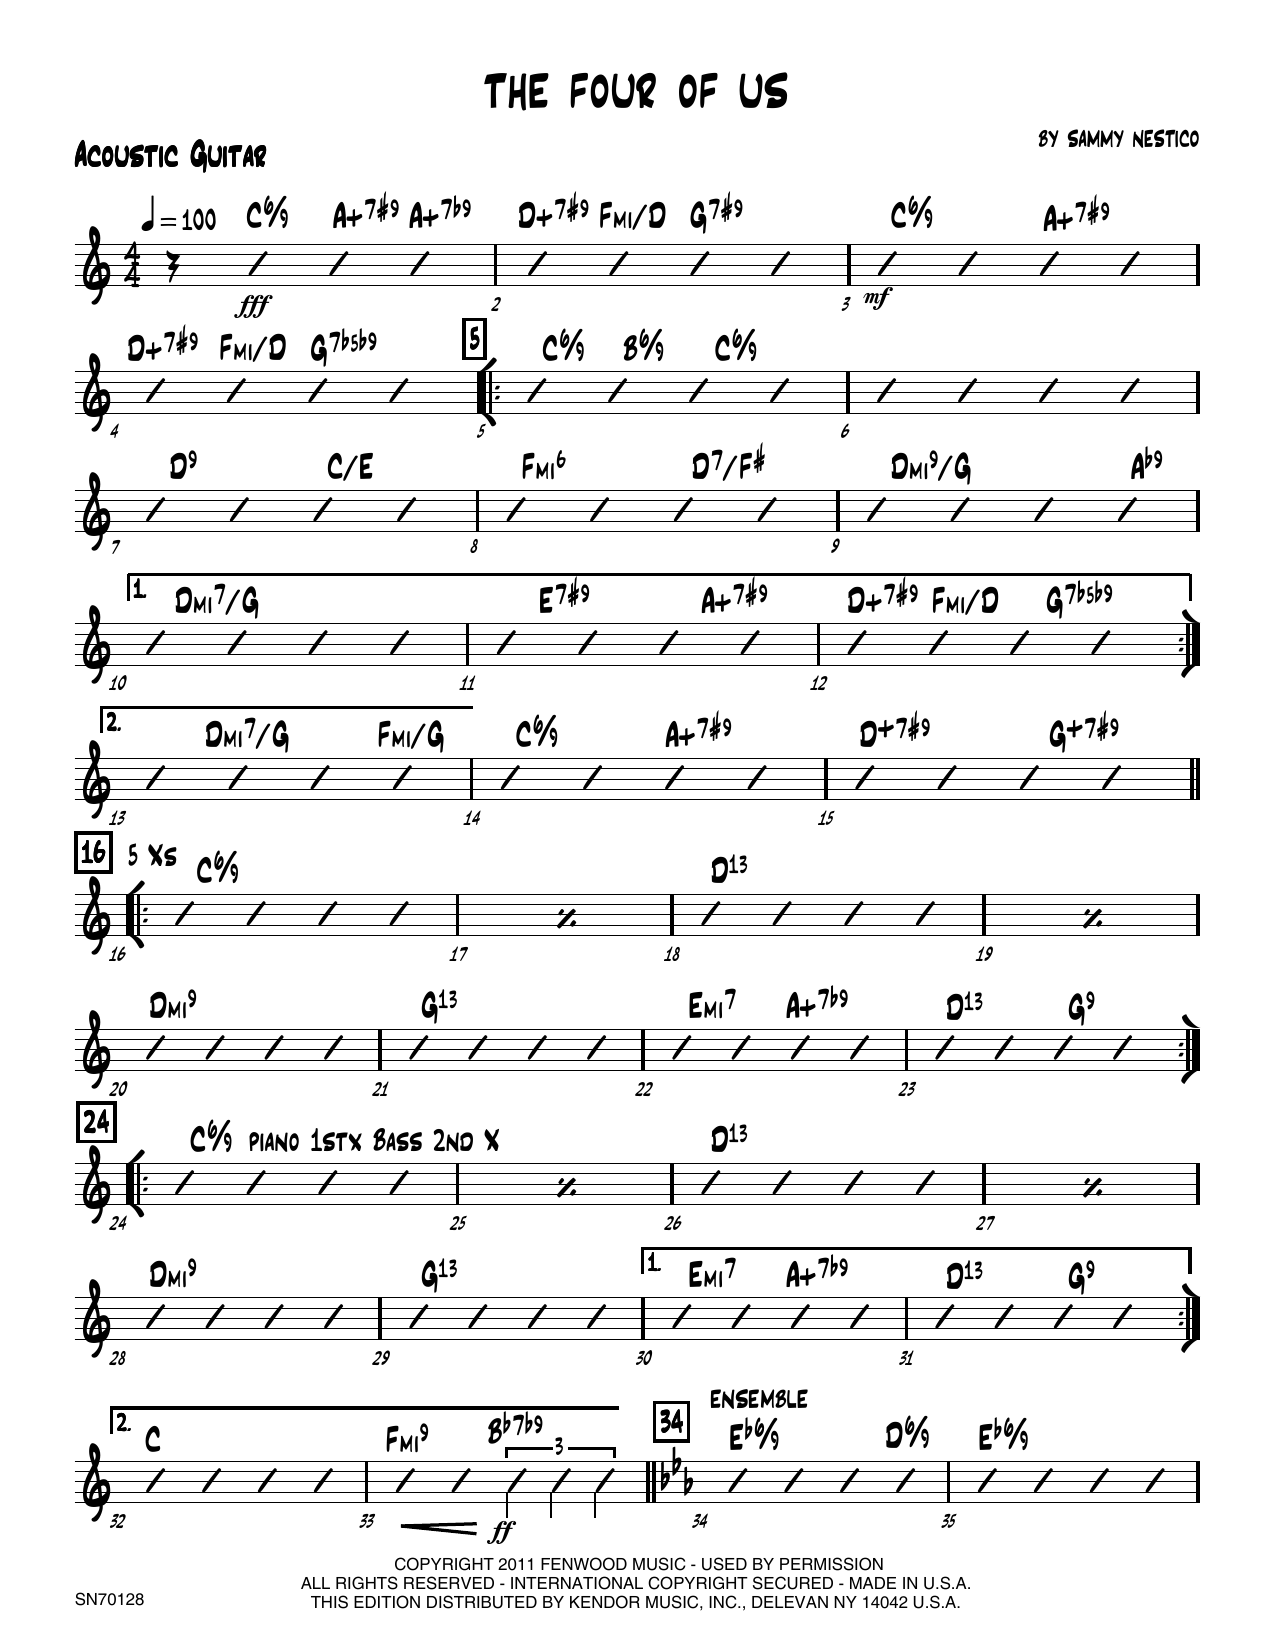 Download Sammy Nestico The Four Of Us - Guitar Sheet Music